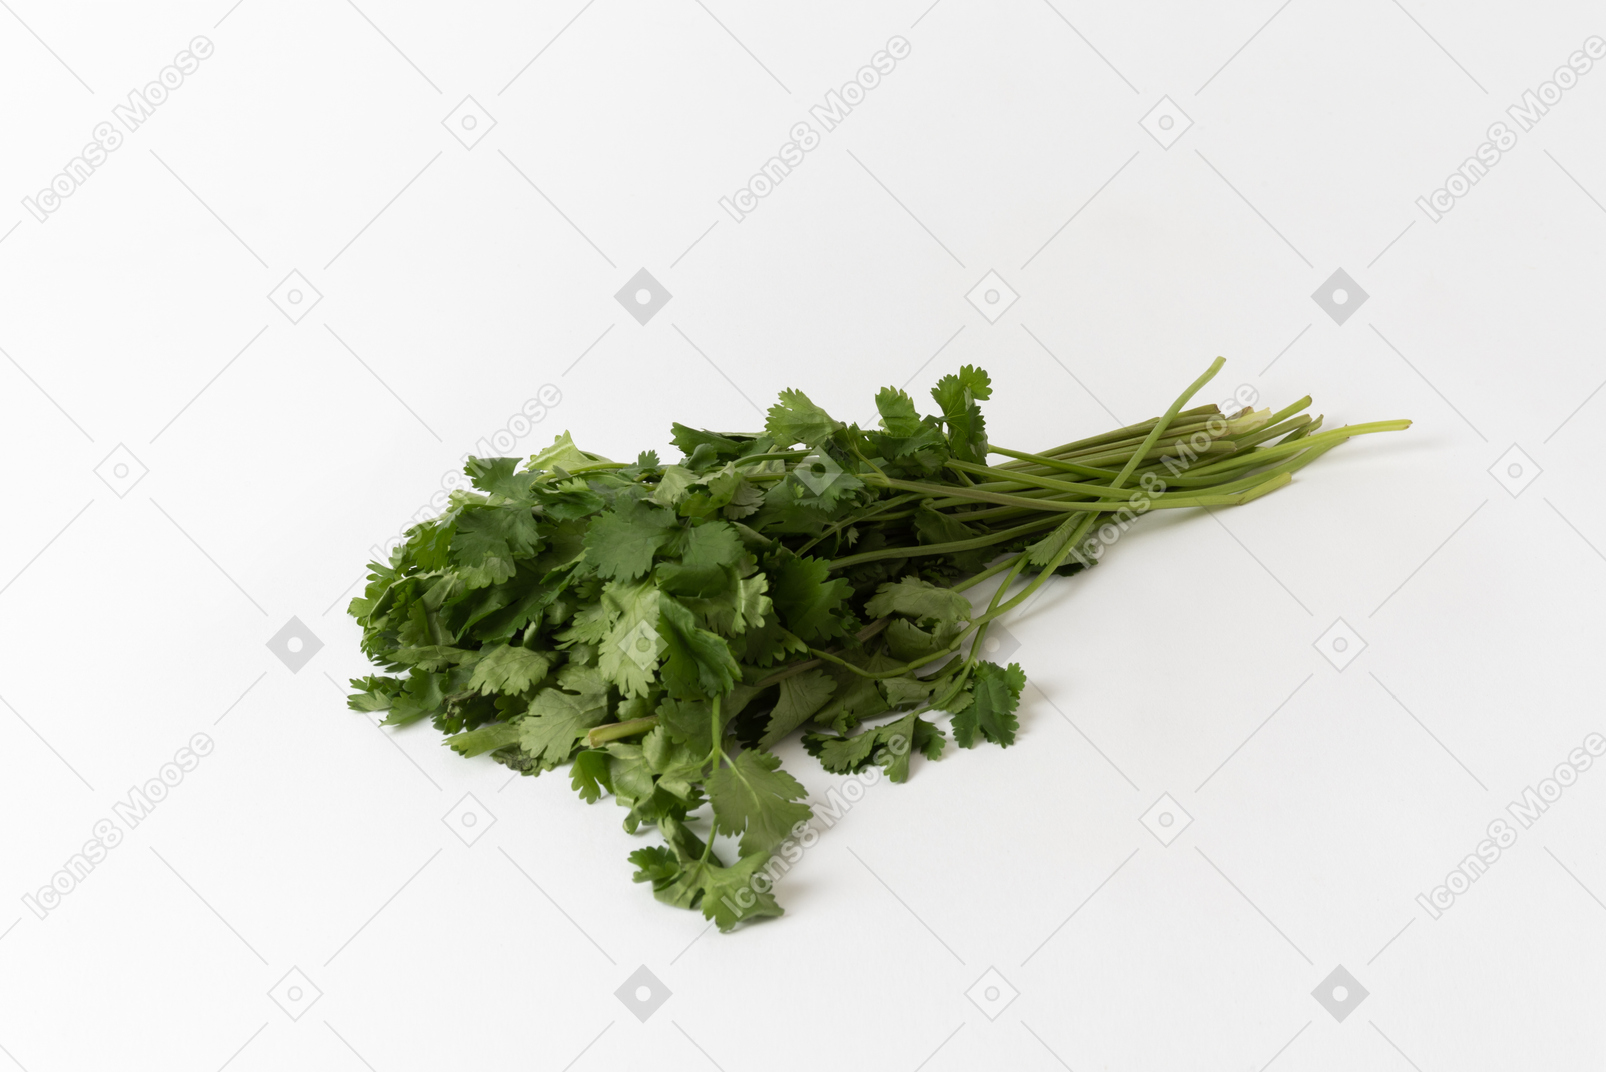 A parsley bunch on a white background